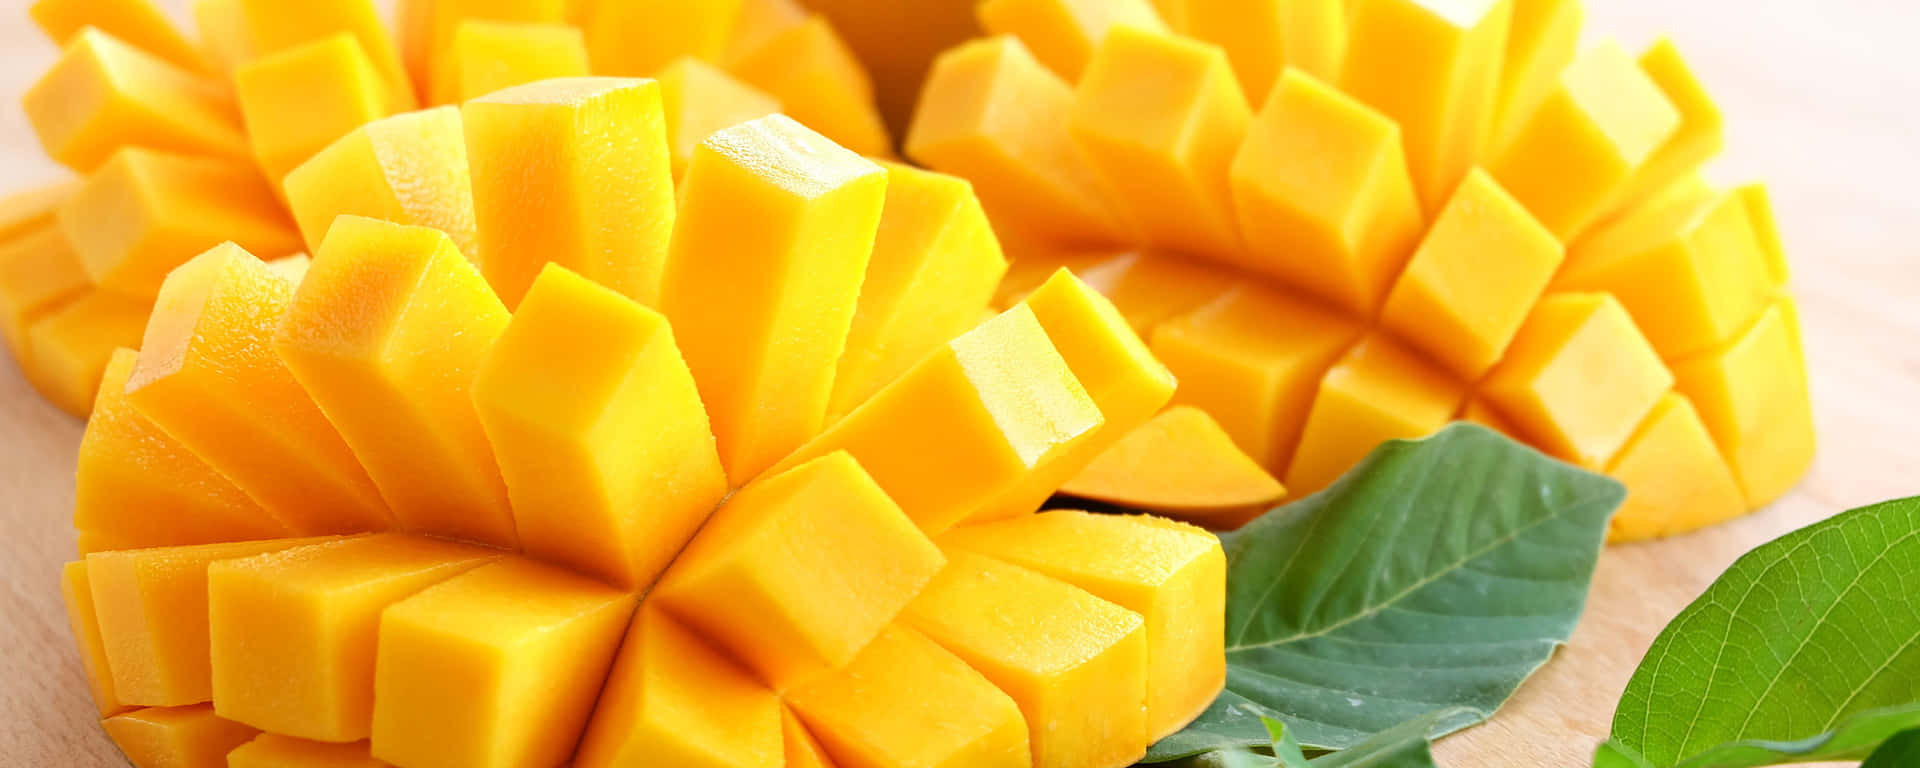 Mango, for an Exotic Flavour